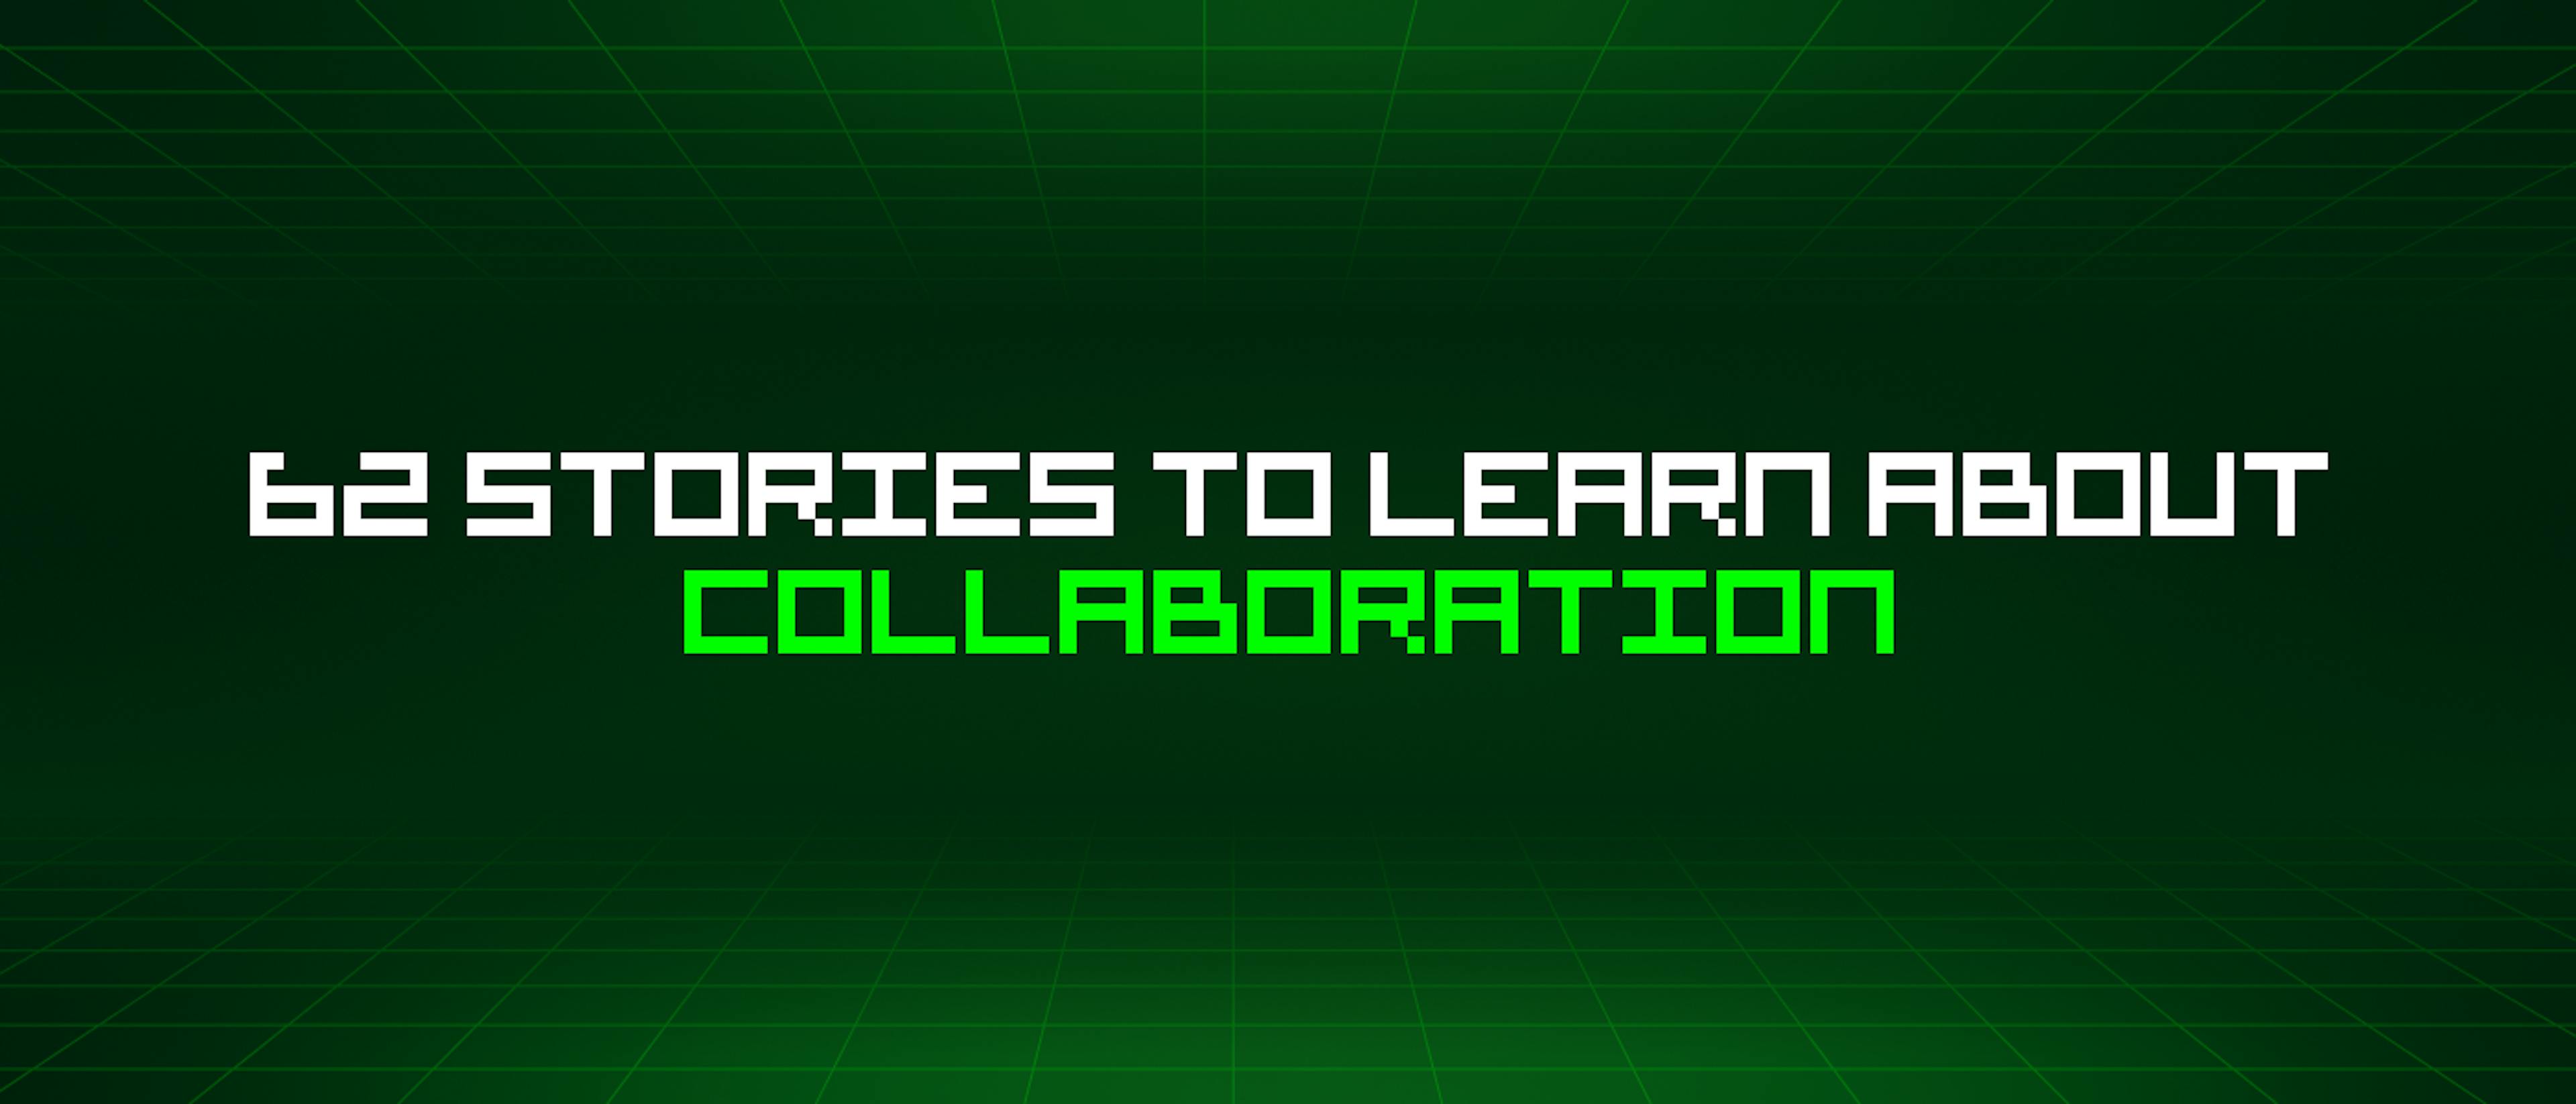 featured image - 62 Stories To Learn About Collaboration